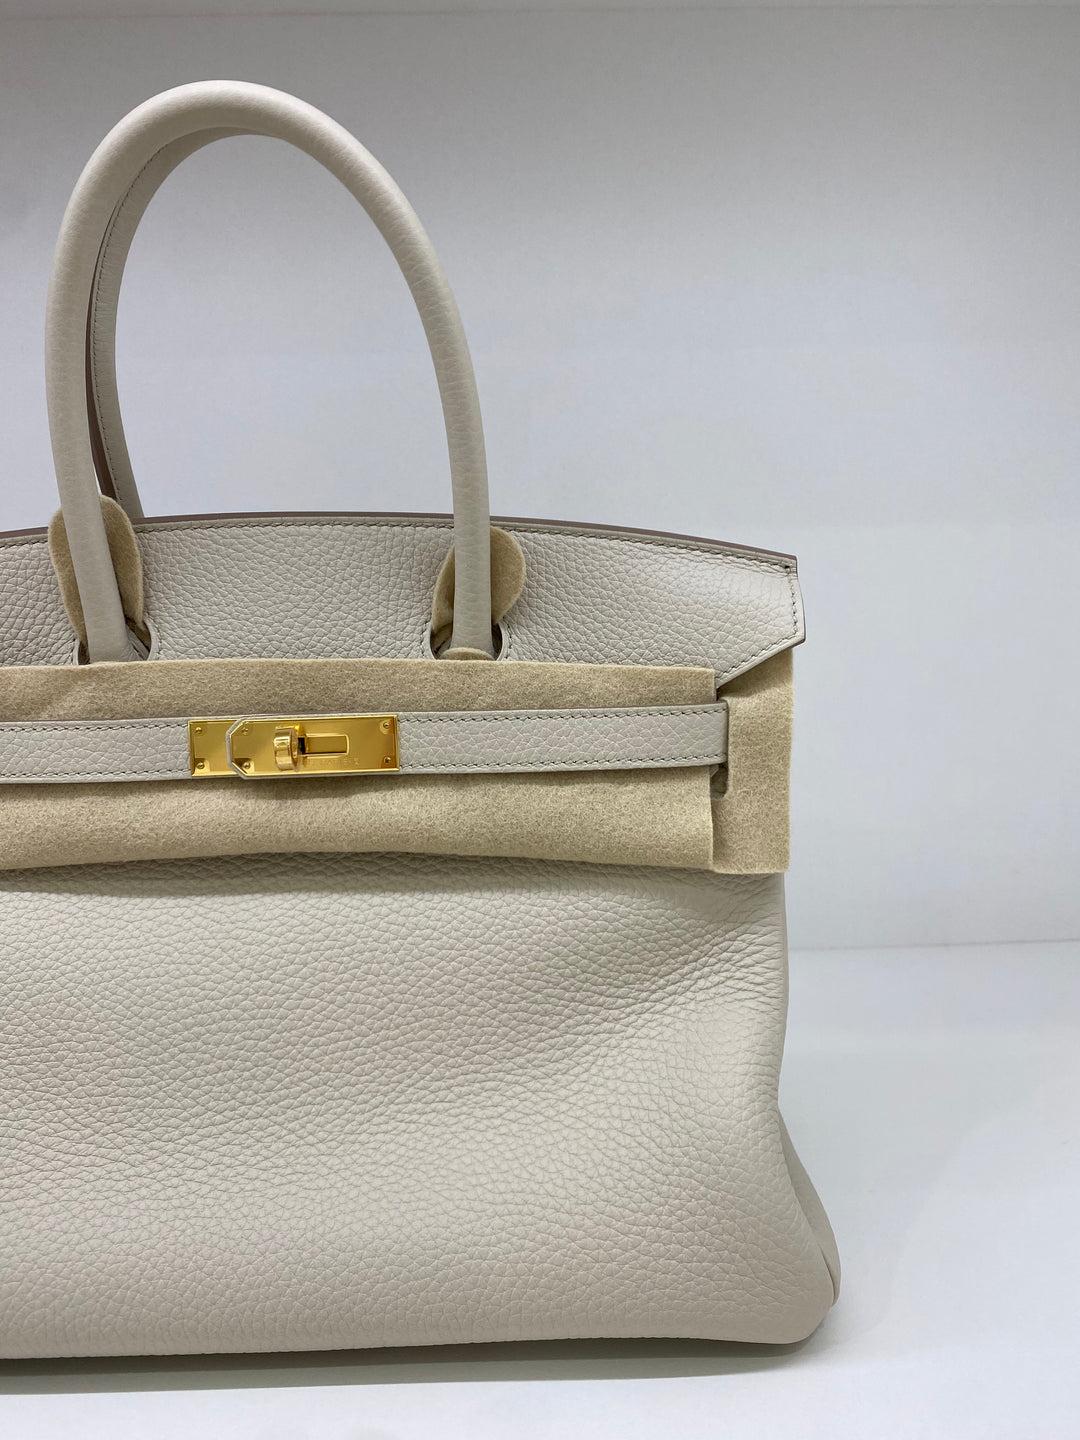 Hermes Birkin 30 Nata GHW In New Condition For Sale In Double Bay, AU